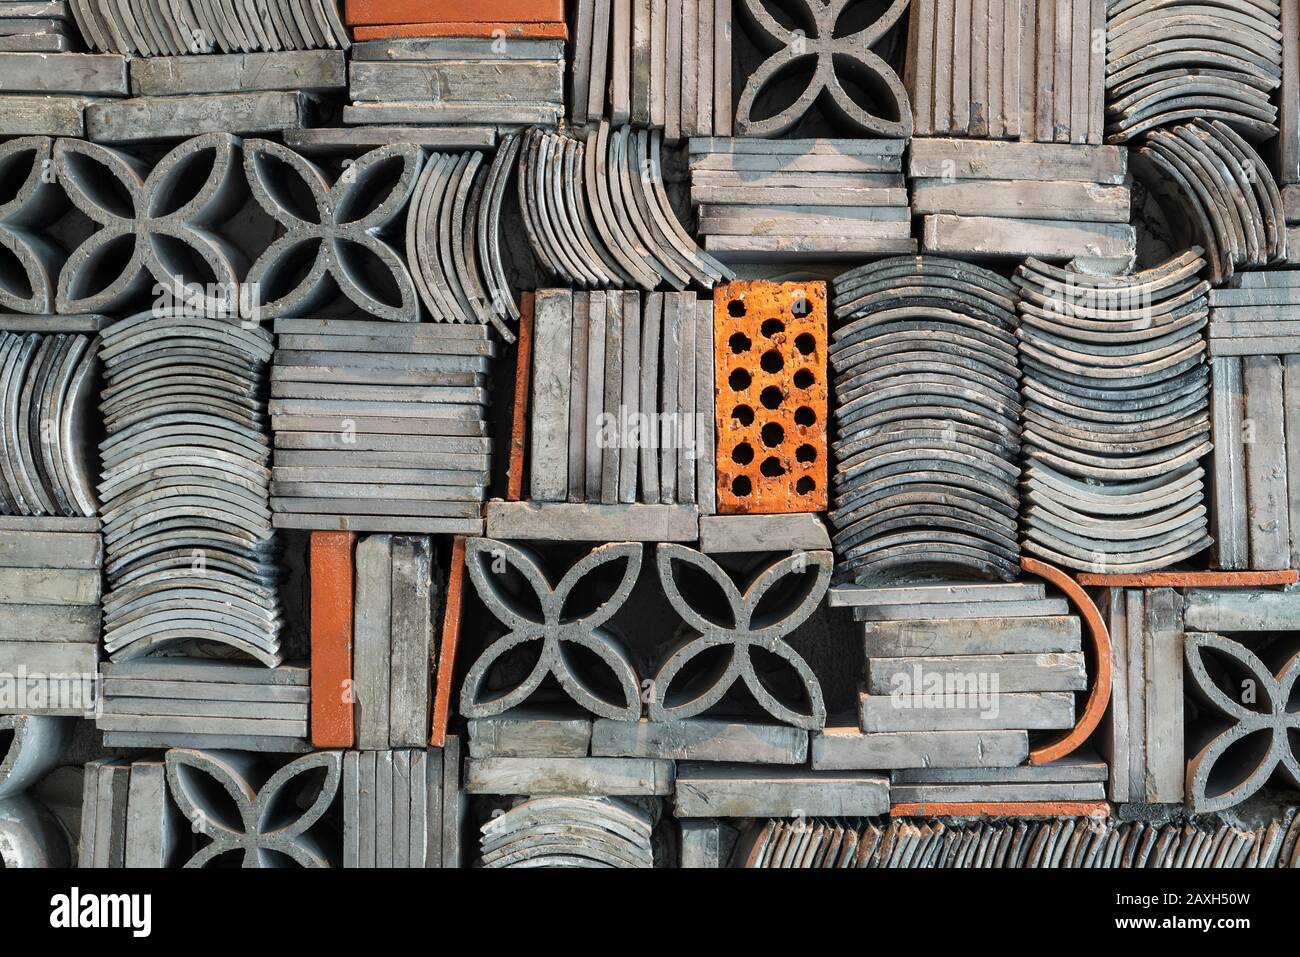 Pattern of roof tiles and bricks Stock Photo